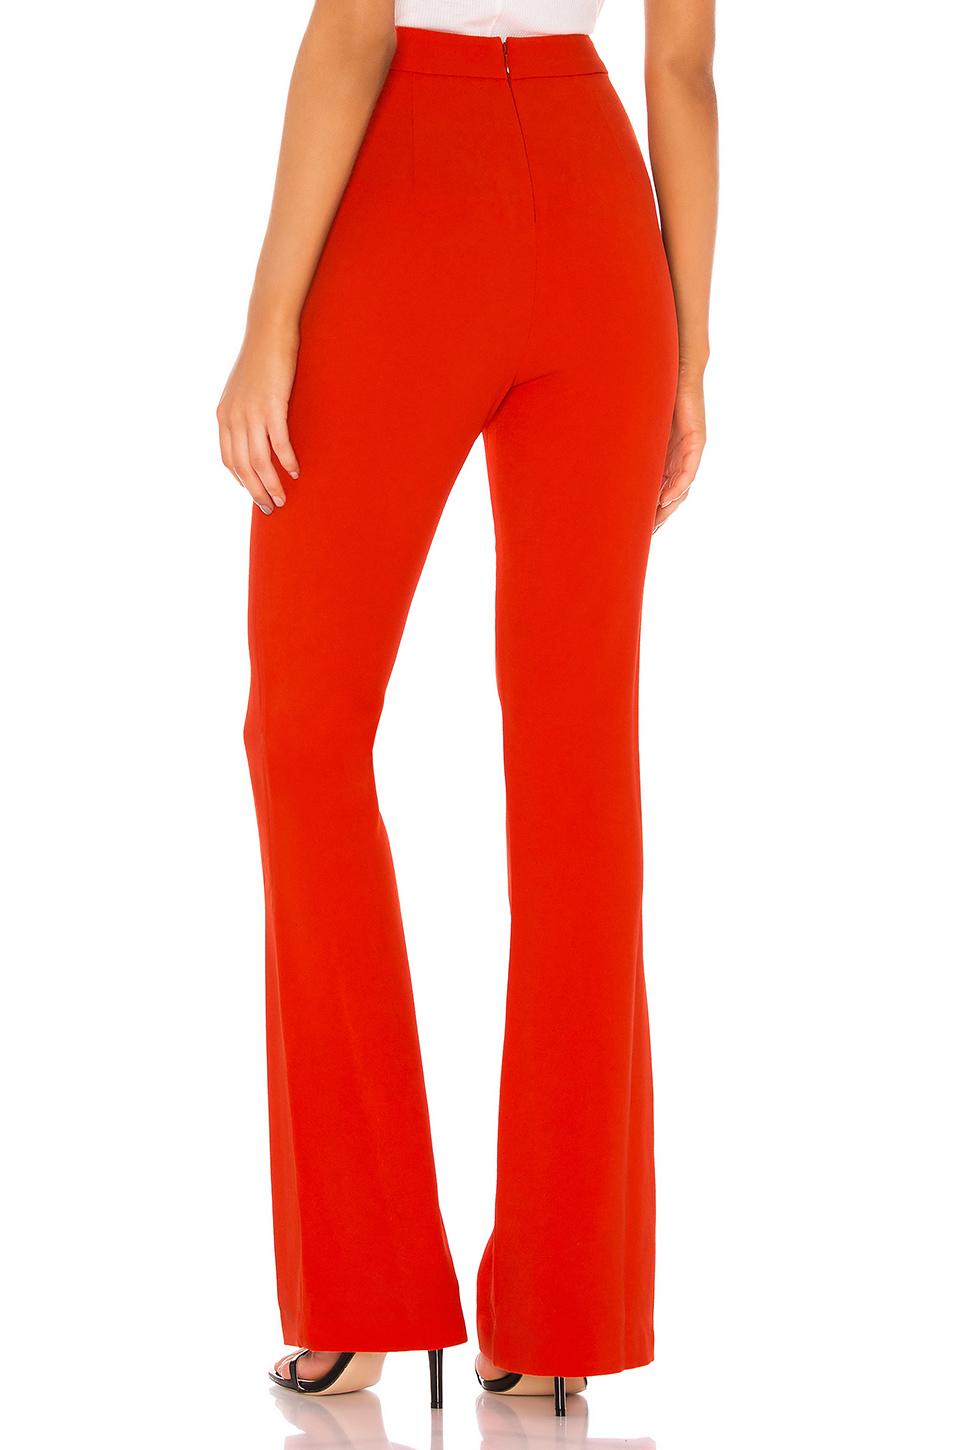 Michael Costello Synthetic X Revolve Linda Pant in Red Orange (Red) - Lyst